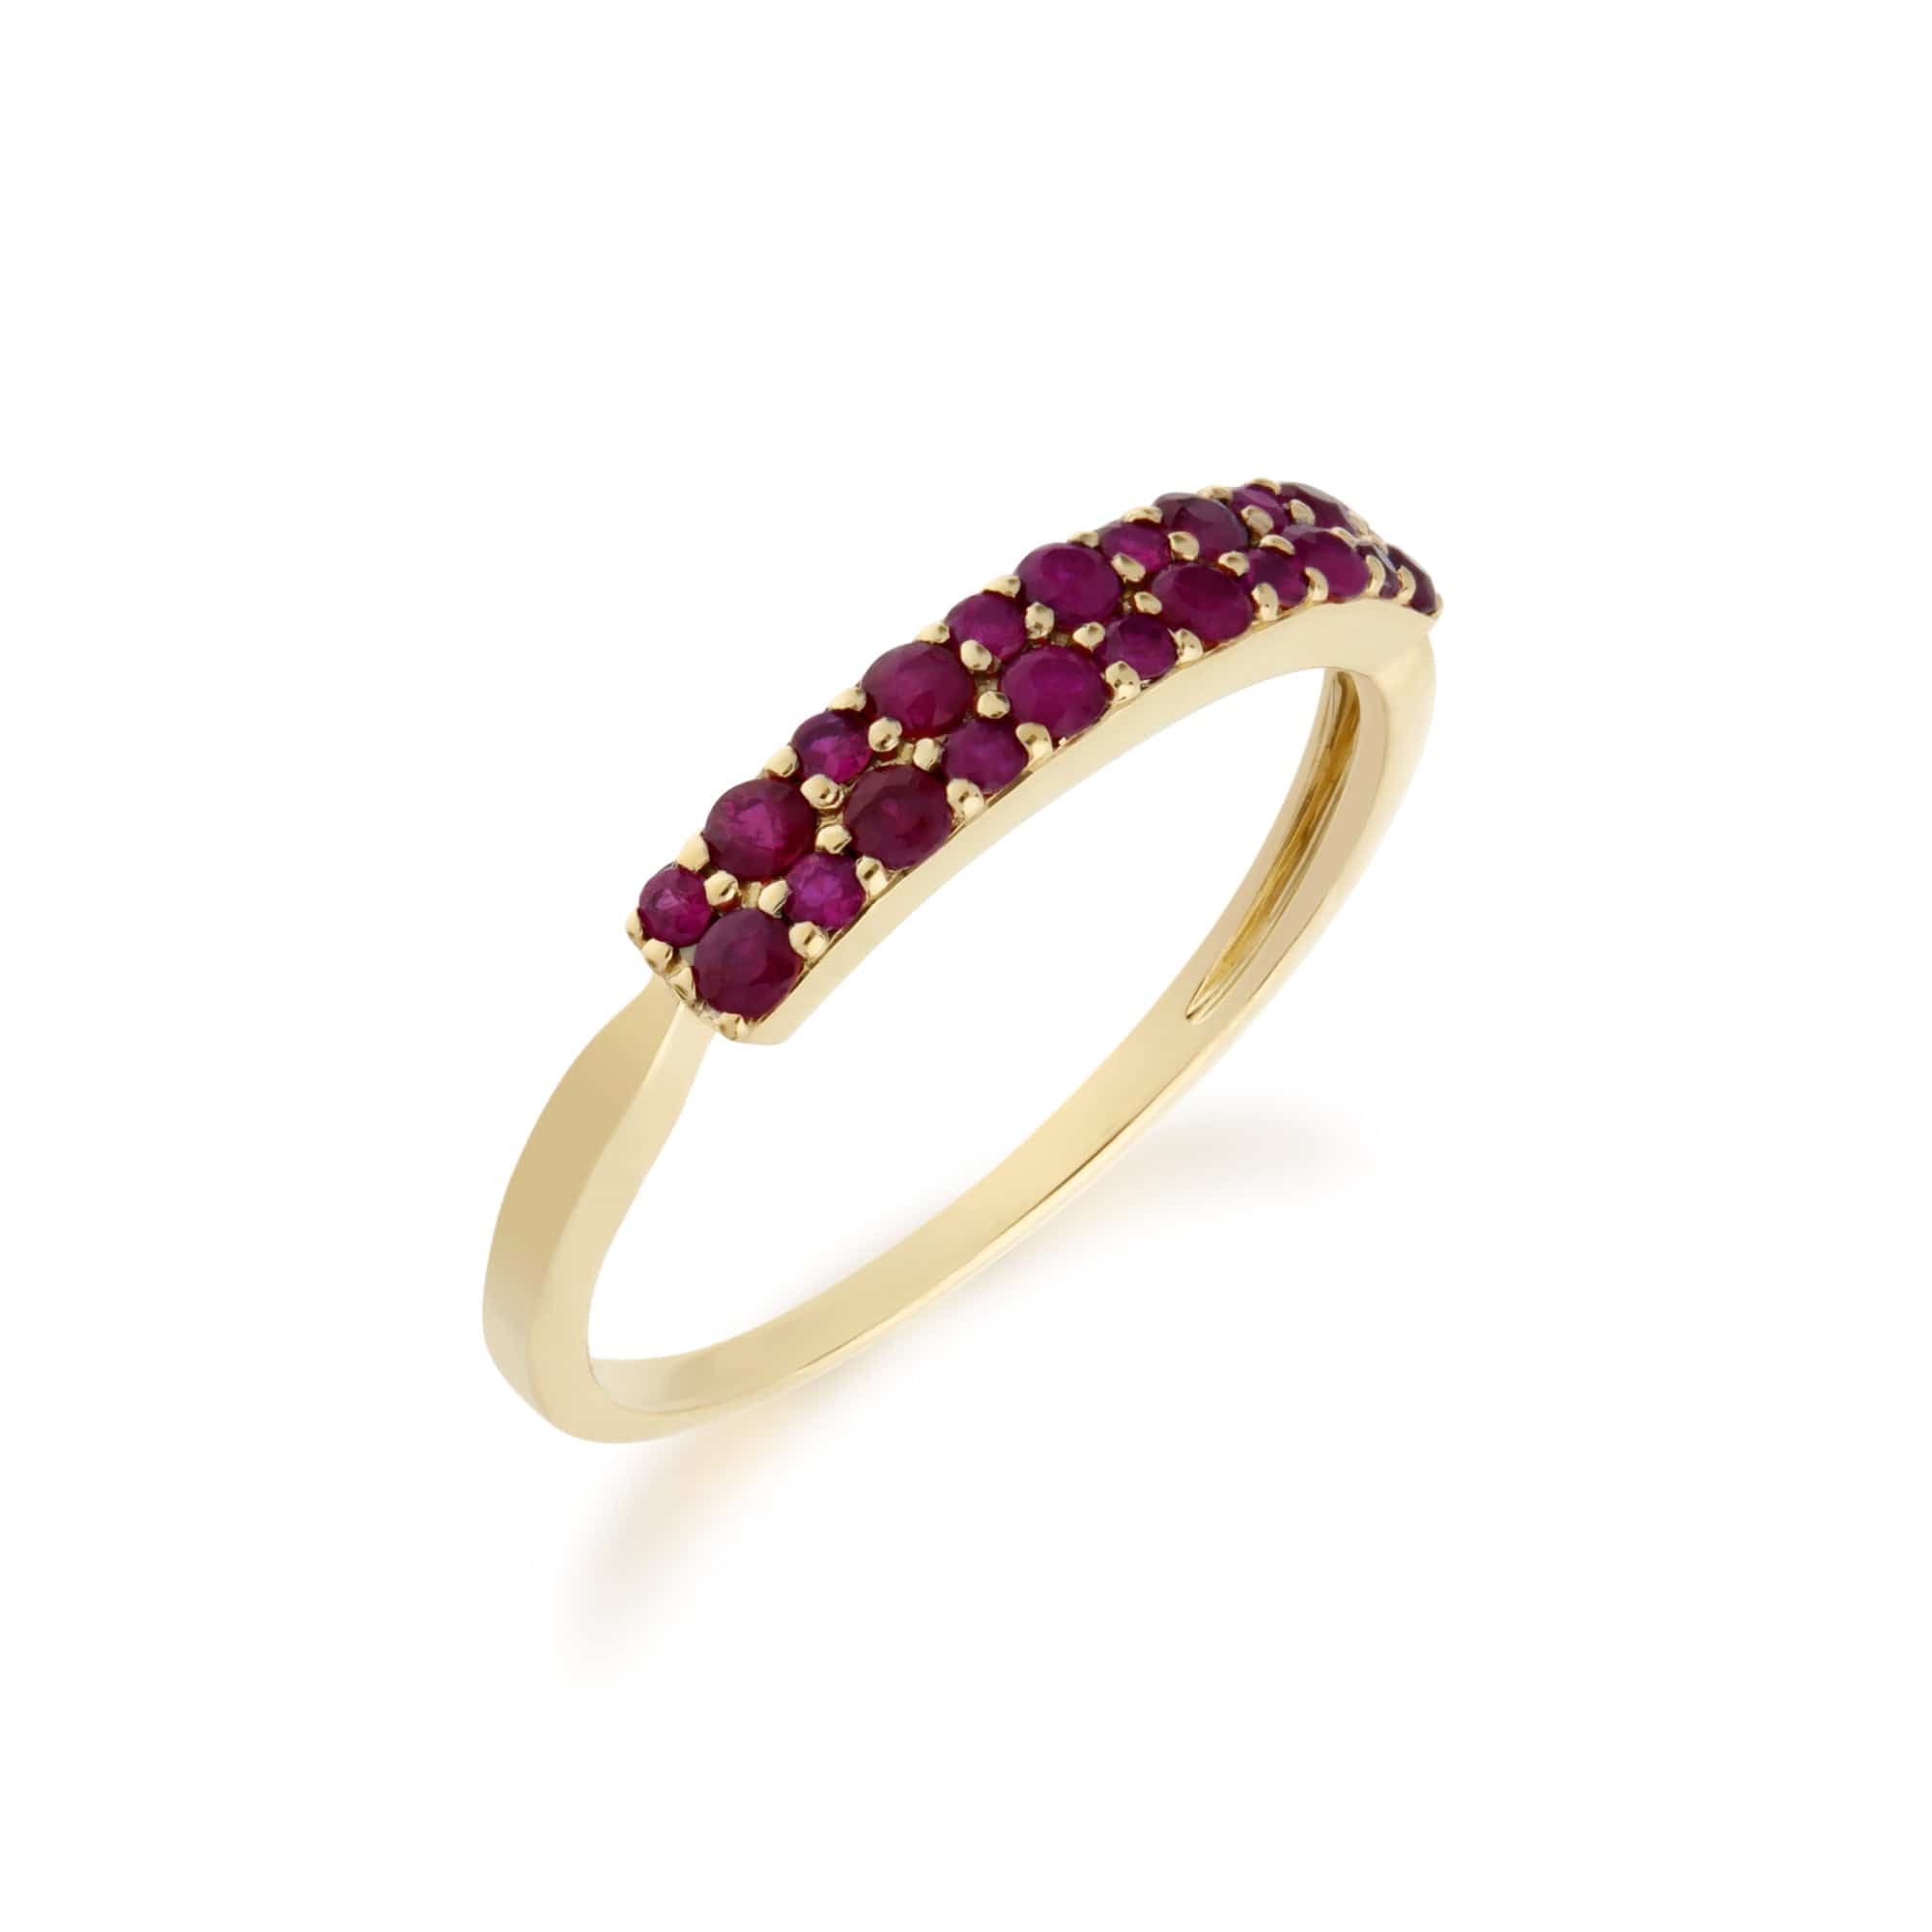 Contemporary 0.41ct Pavé Ruby Cluster Ring in 9ct Yellow Gold - Gemondo